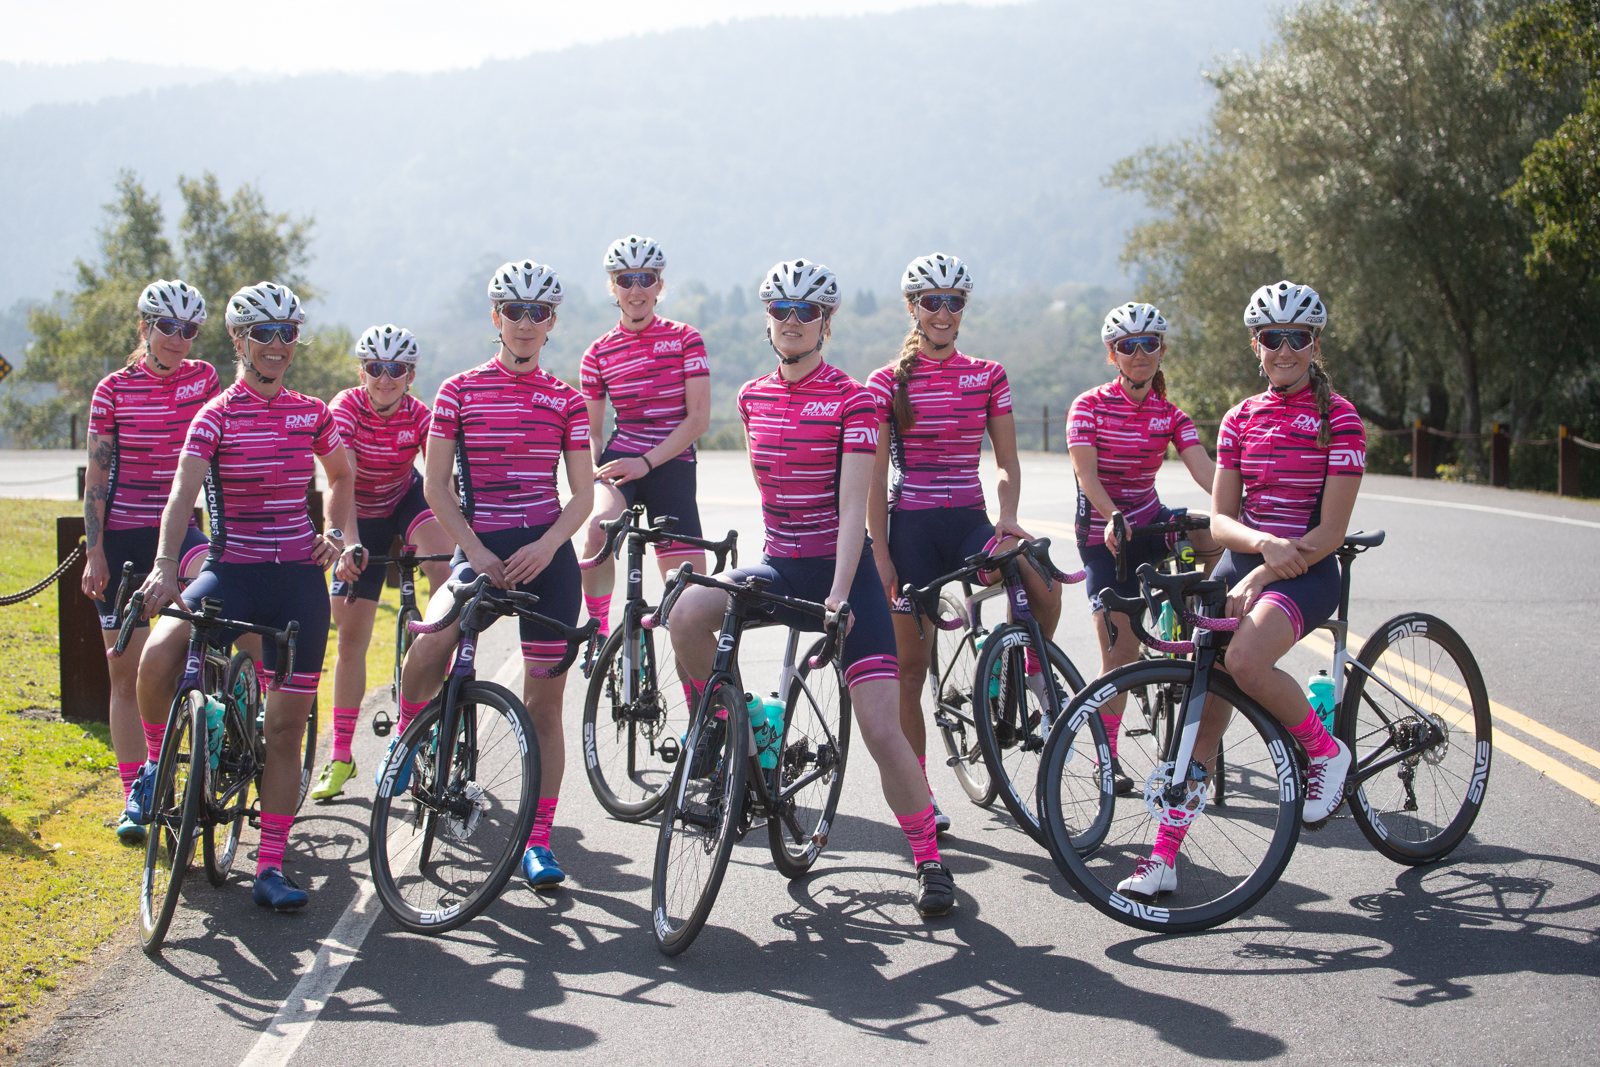 The 2021 DNA Pro Cycling Team (L-R): Kimberly Lucie, Liza Rachetto, Maggie Coles-Lyster, Heather Fischer, Brenna Wrye-Simpson, Margot Clyne, Hanna Muegge, Sarah Kaufmann, and Katie Clouse. Not pictured: Mia Kilburge, Erica Clevenger, Nicole Shields. Photo by Catherine Fegan-Kim